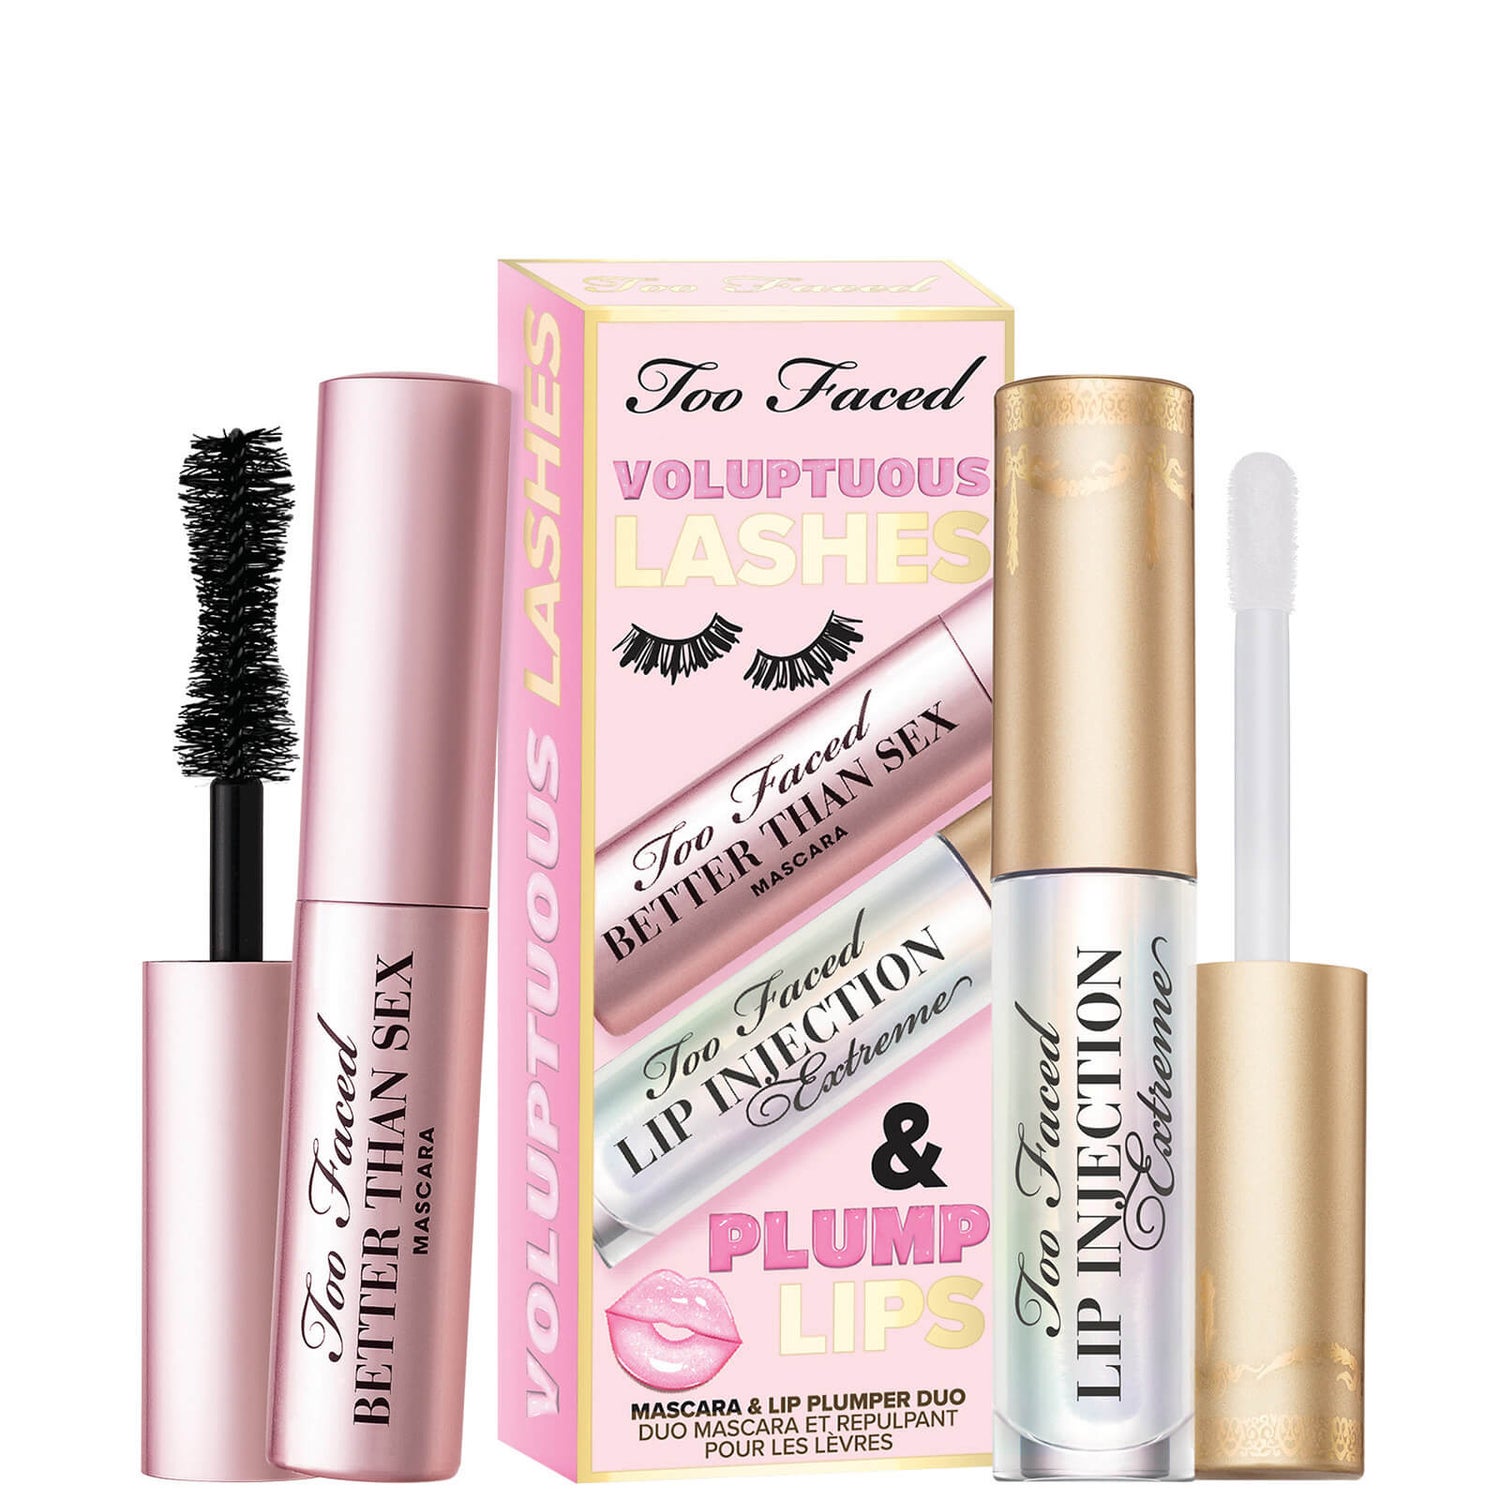 Too Faced Exclusive Limited Edition Voluptuous Lashes and Plump Lips Set